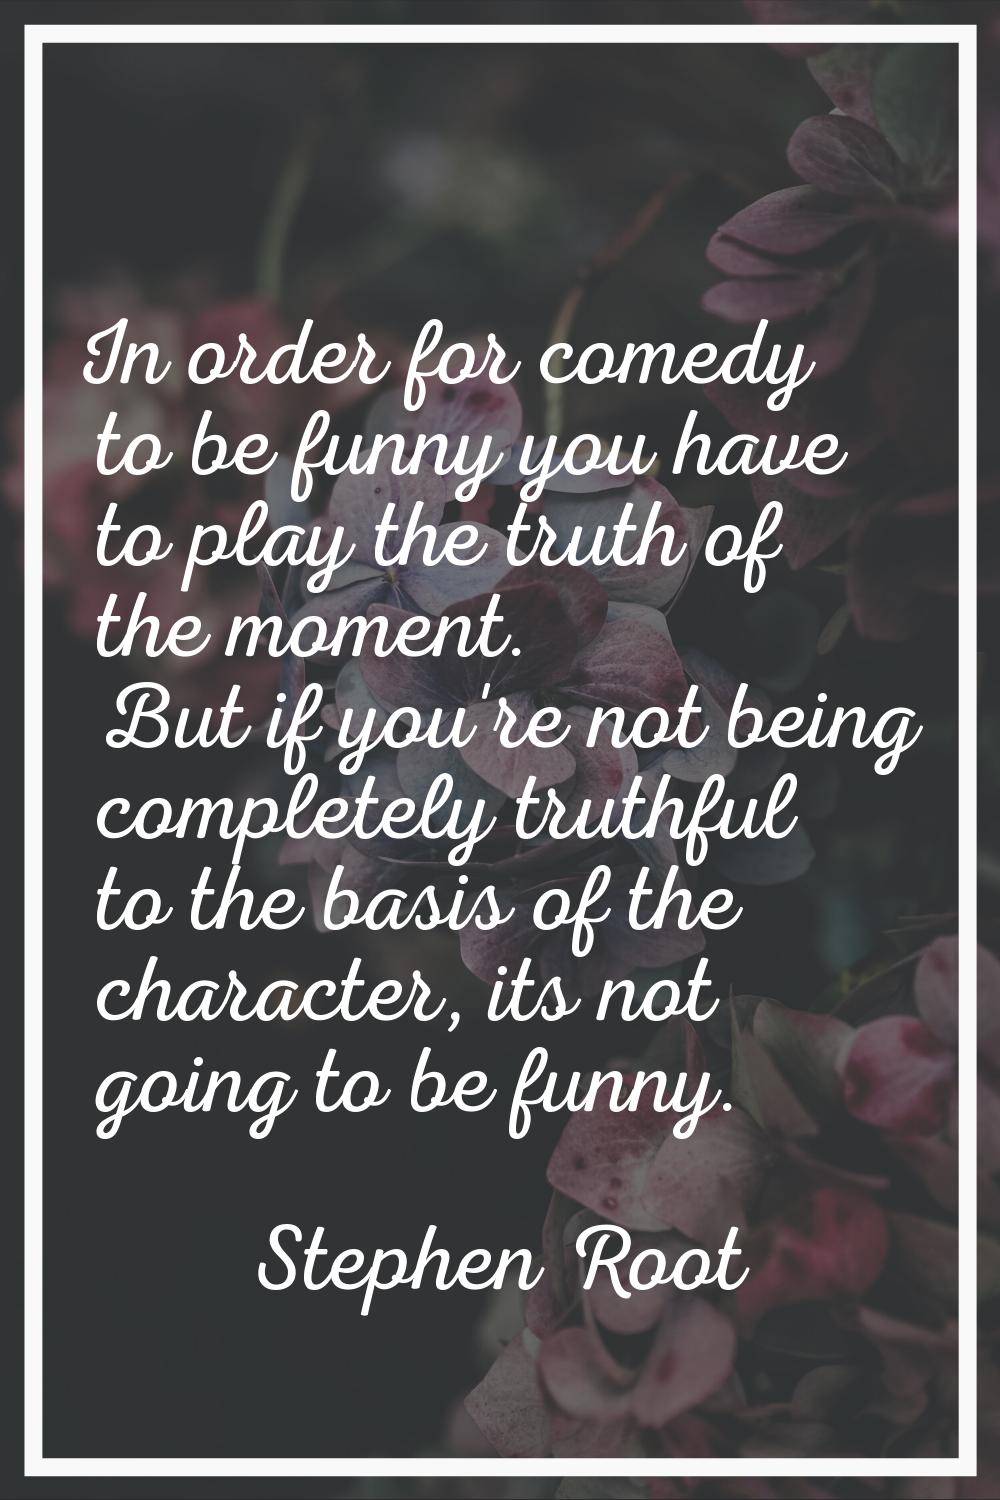 In order for comedy to be funny you have to play the truth of the moment. But if you're not being c